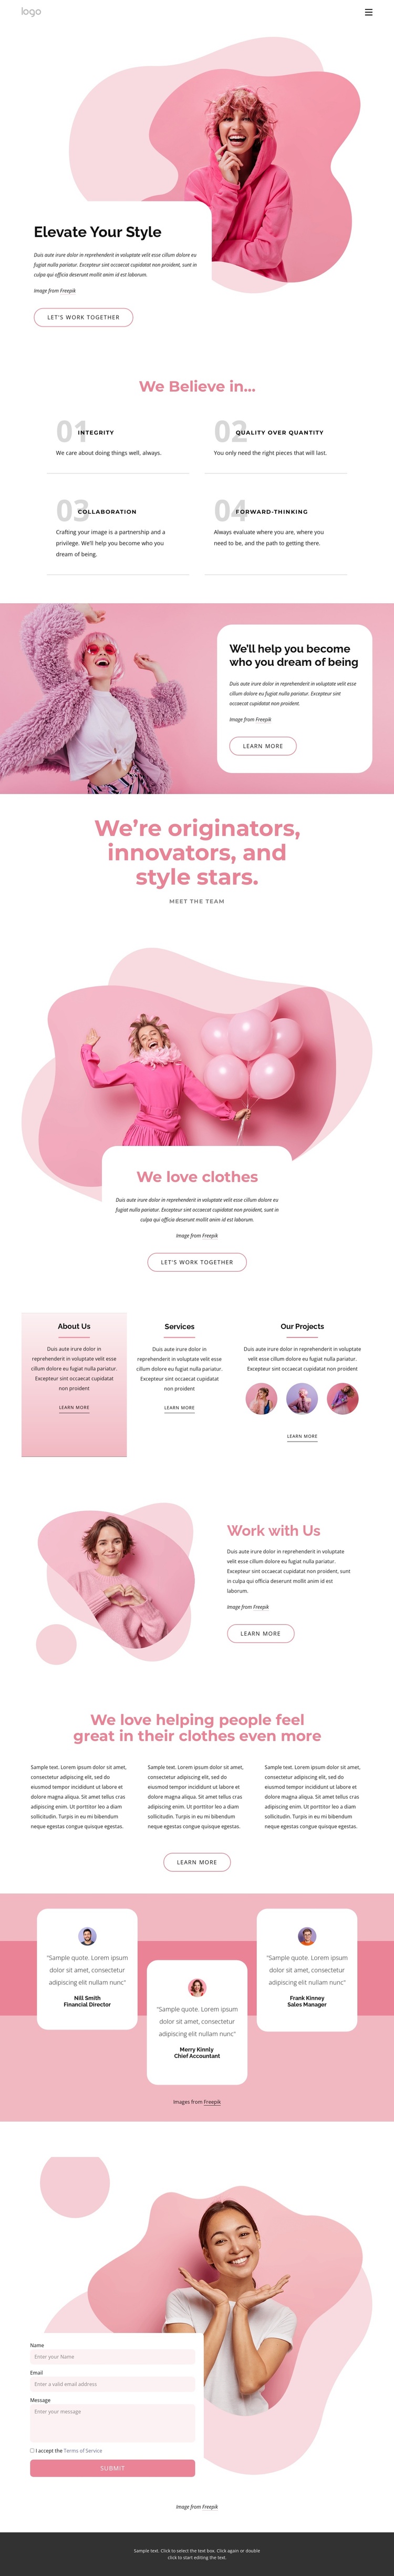 Elevate your style Joomla Template